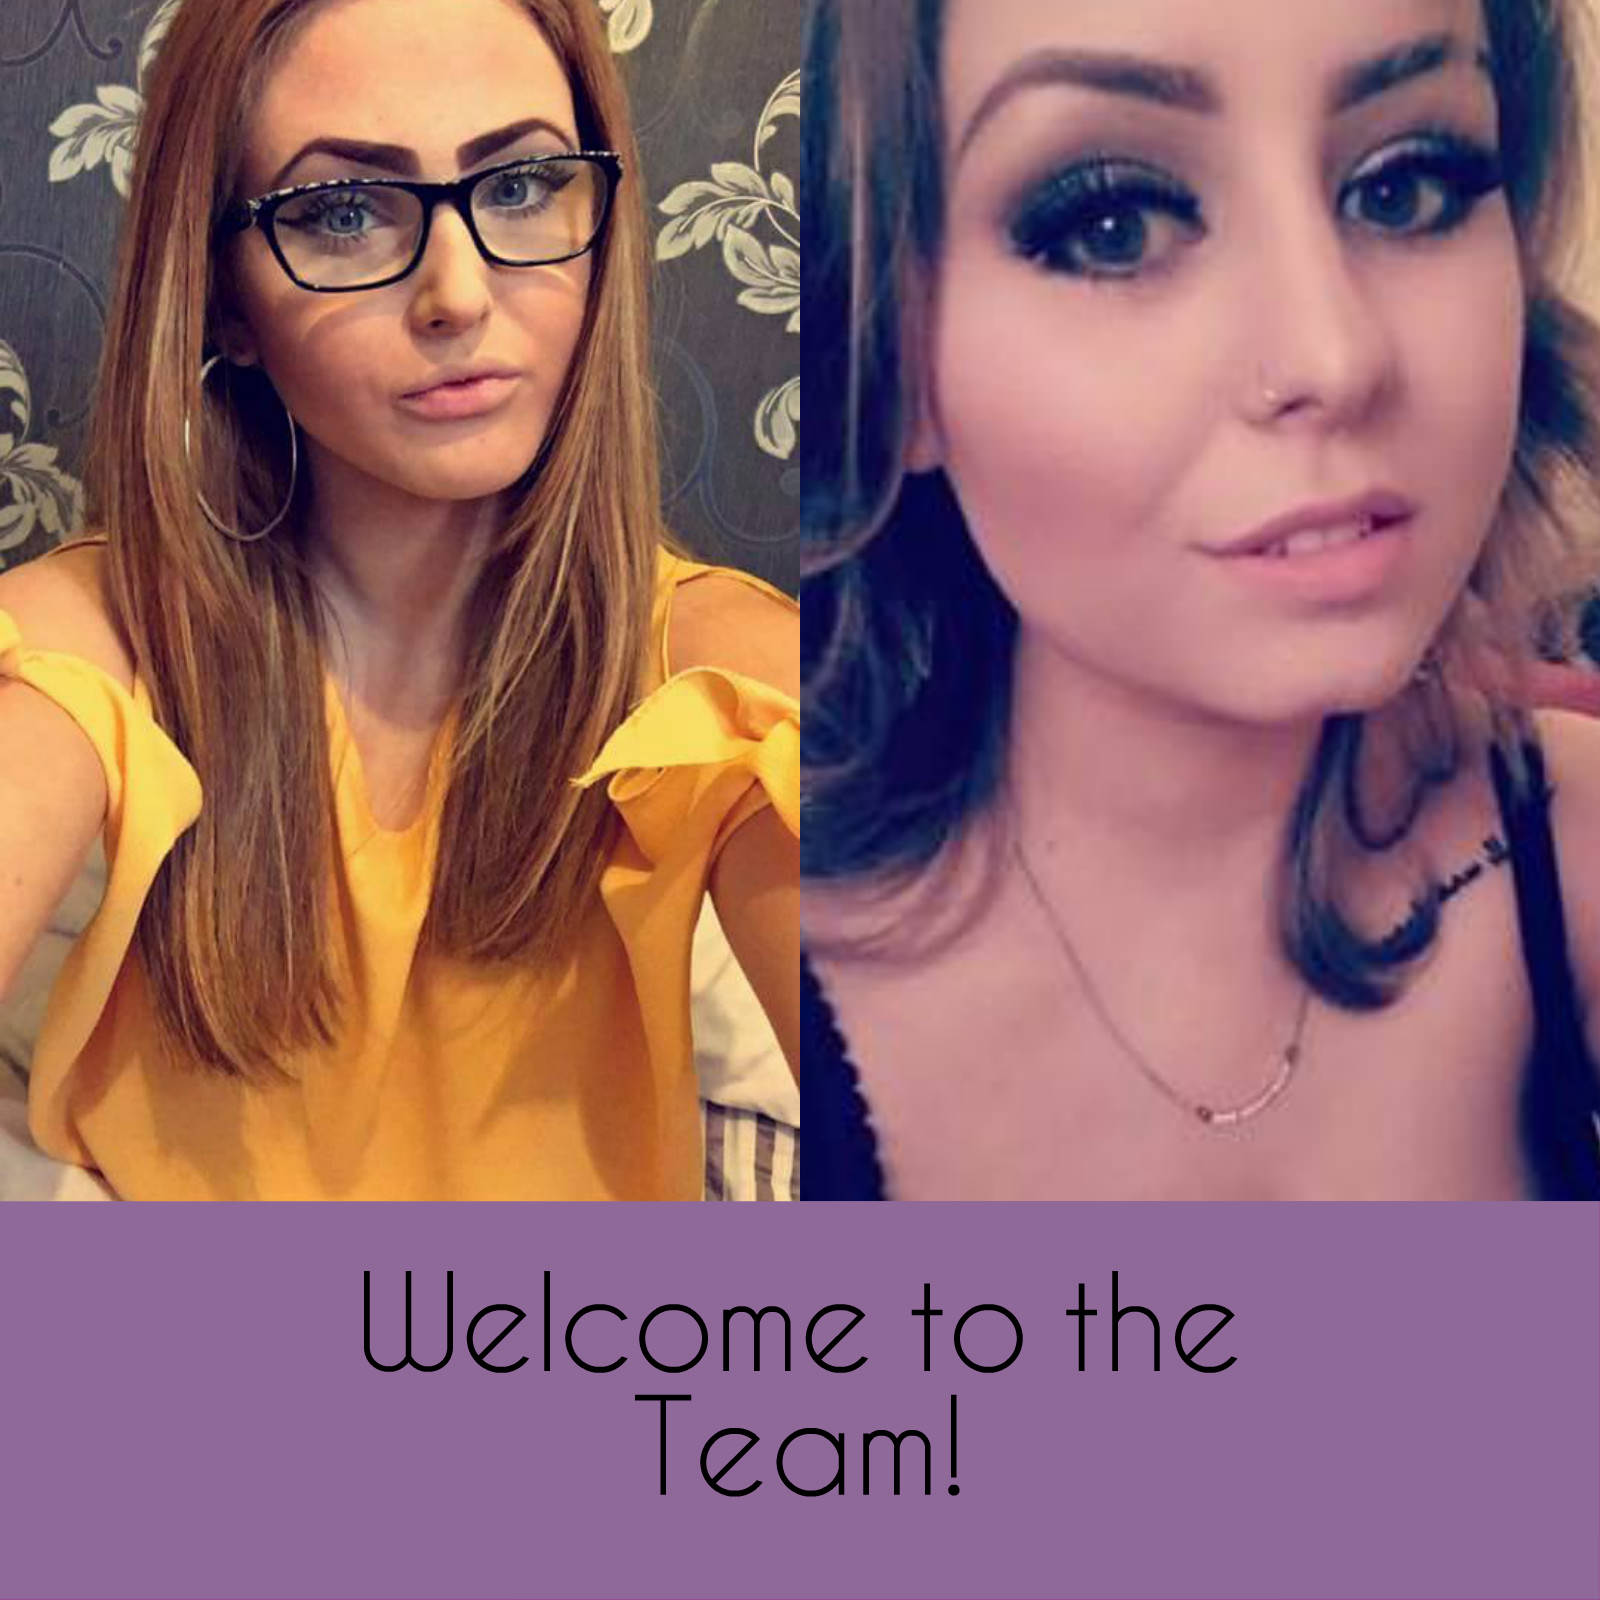 Introducing Our Two New Team Members